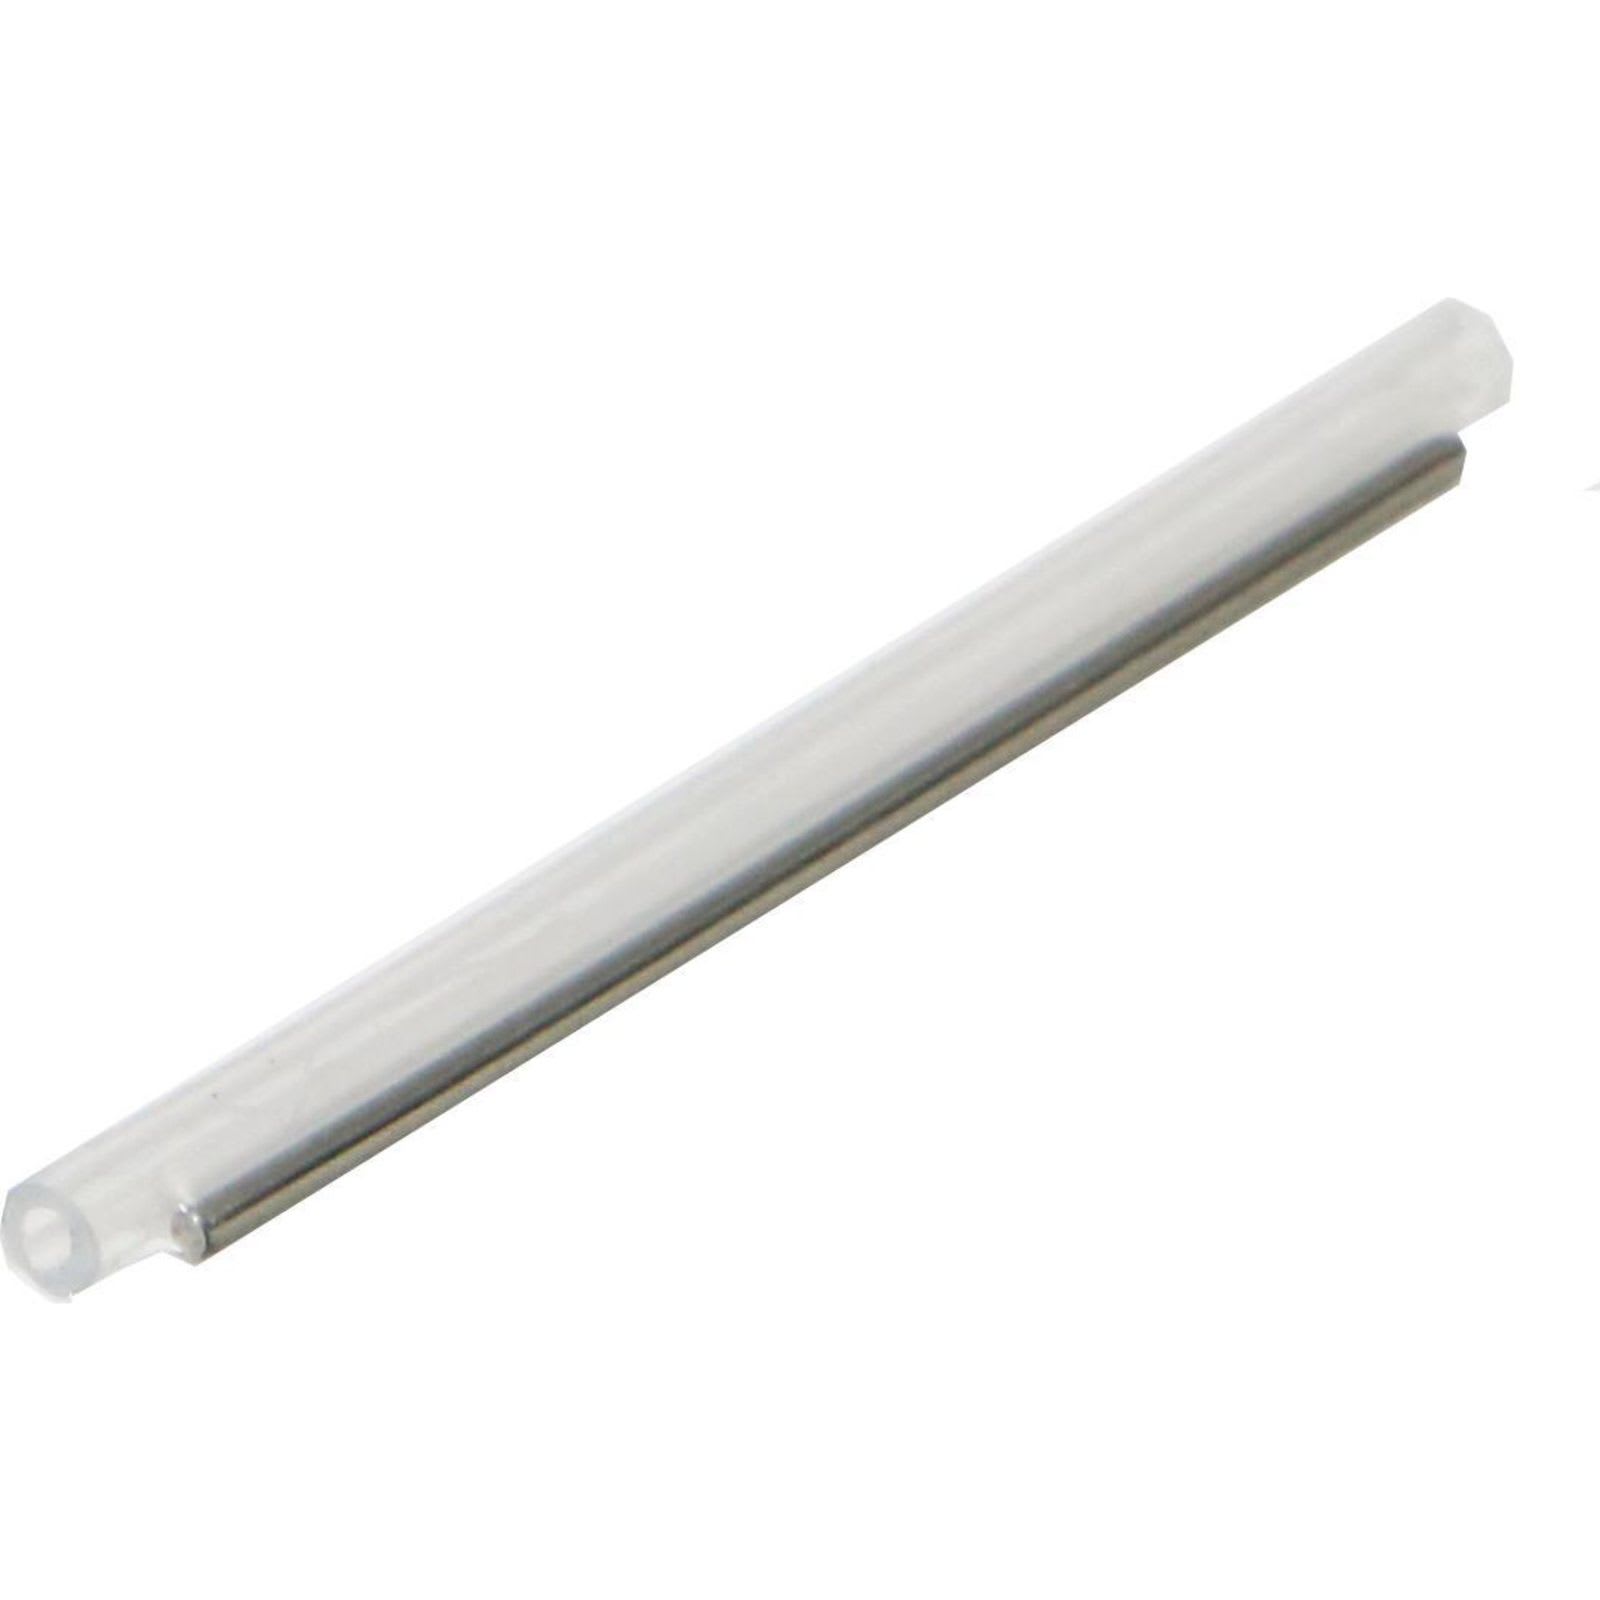 Excel Networking Solutions - Excel 2mm x 45mm splice protector